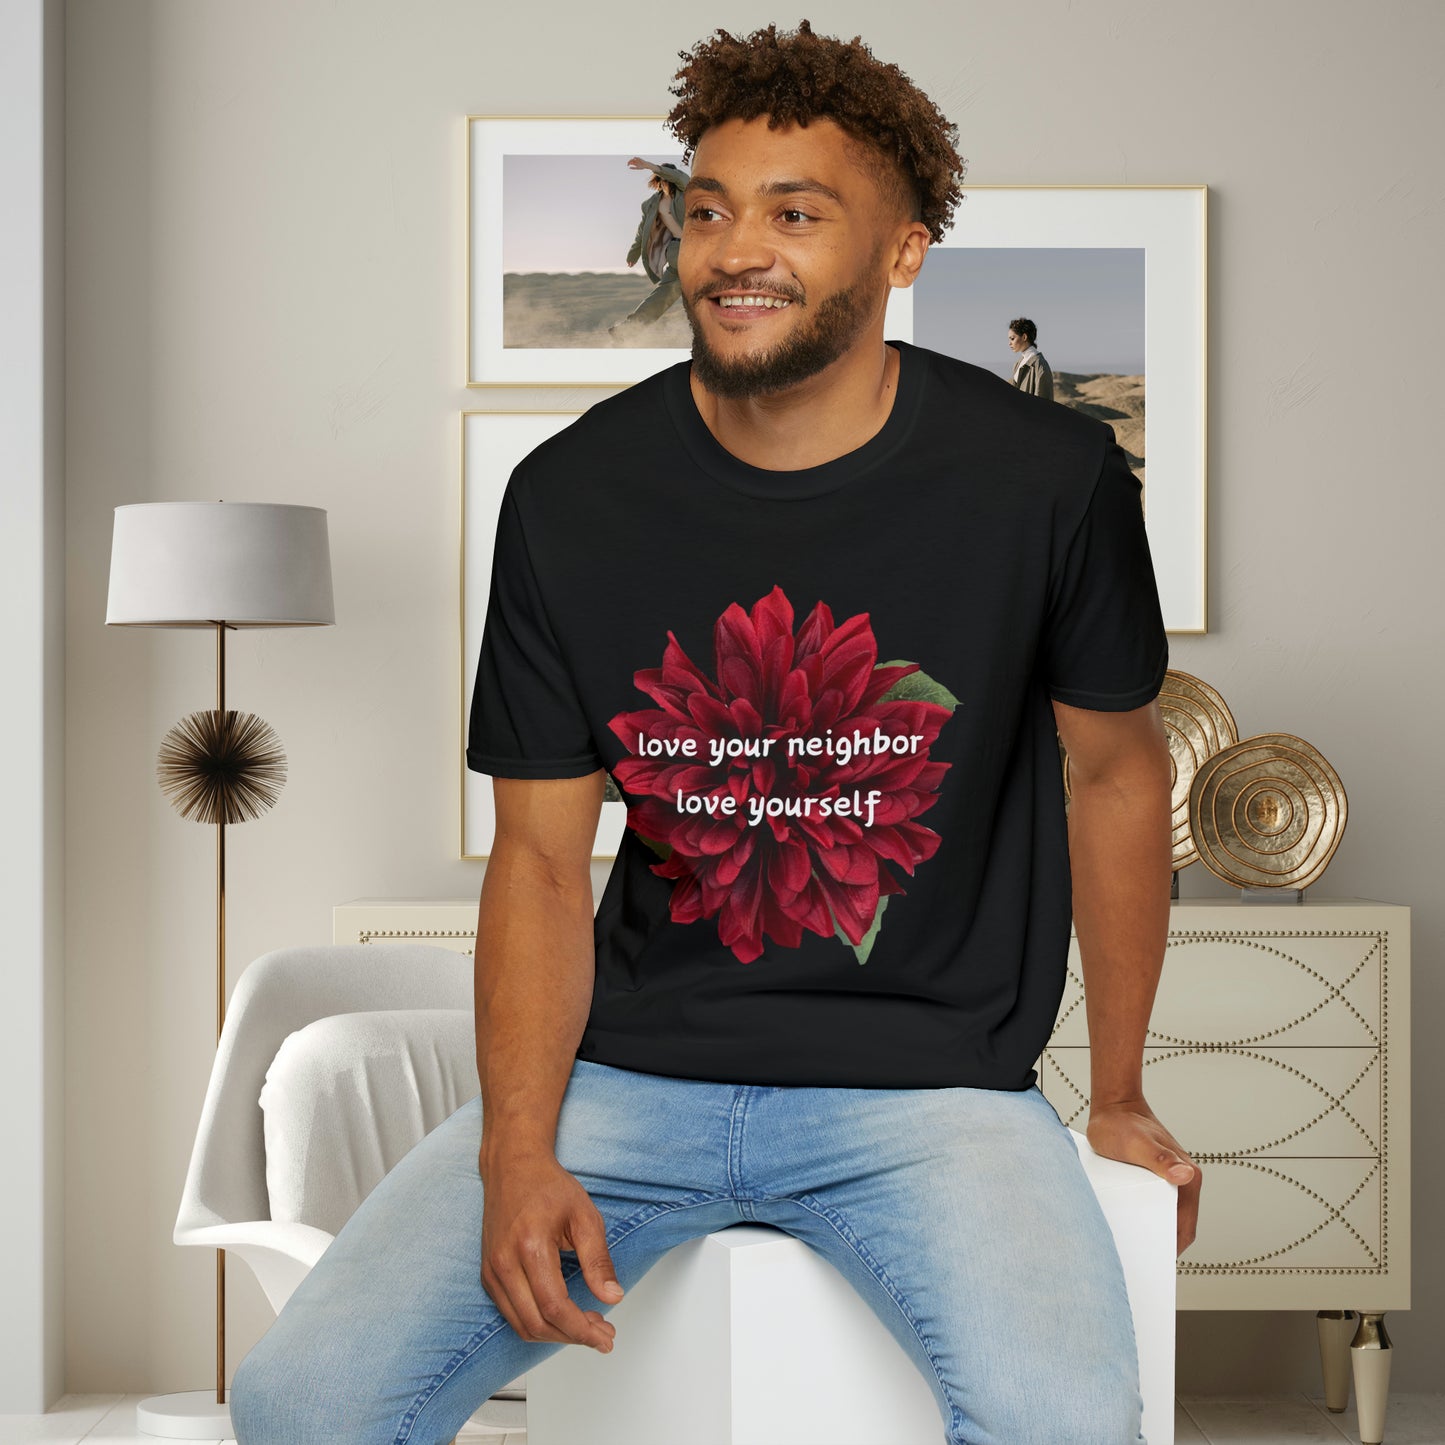 A message of “love your neighbor love yourself” over a beautiful red flower. This is a Unisex Softstyle T-Shirt.